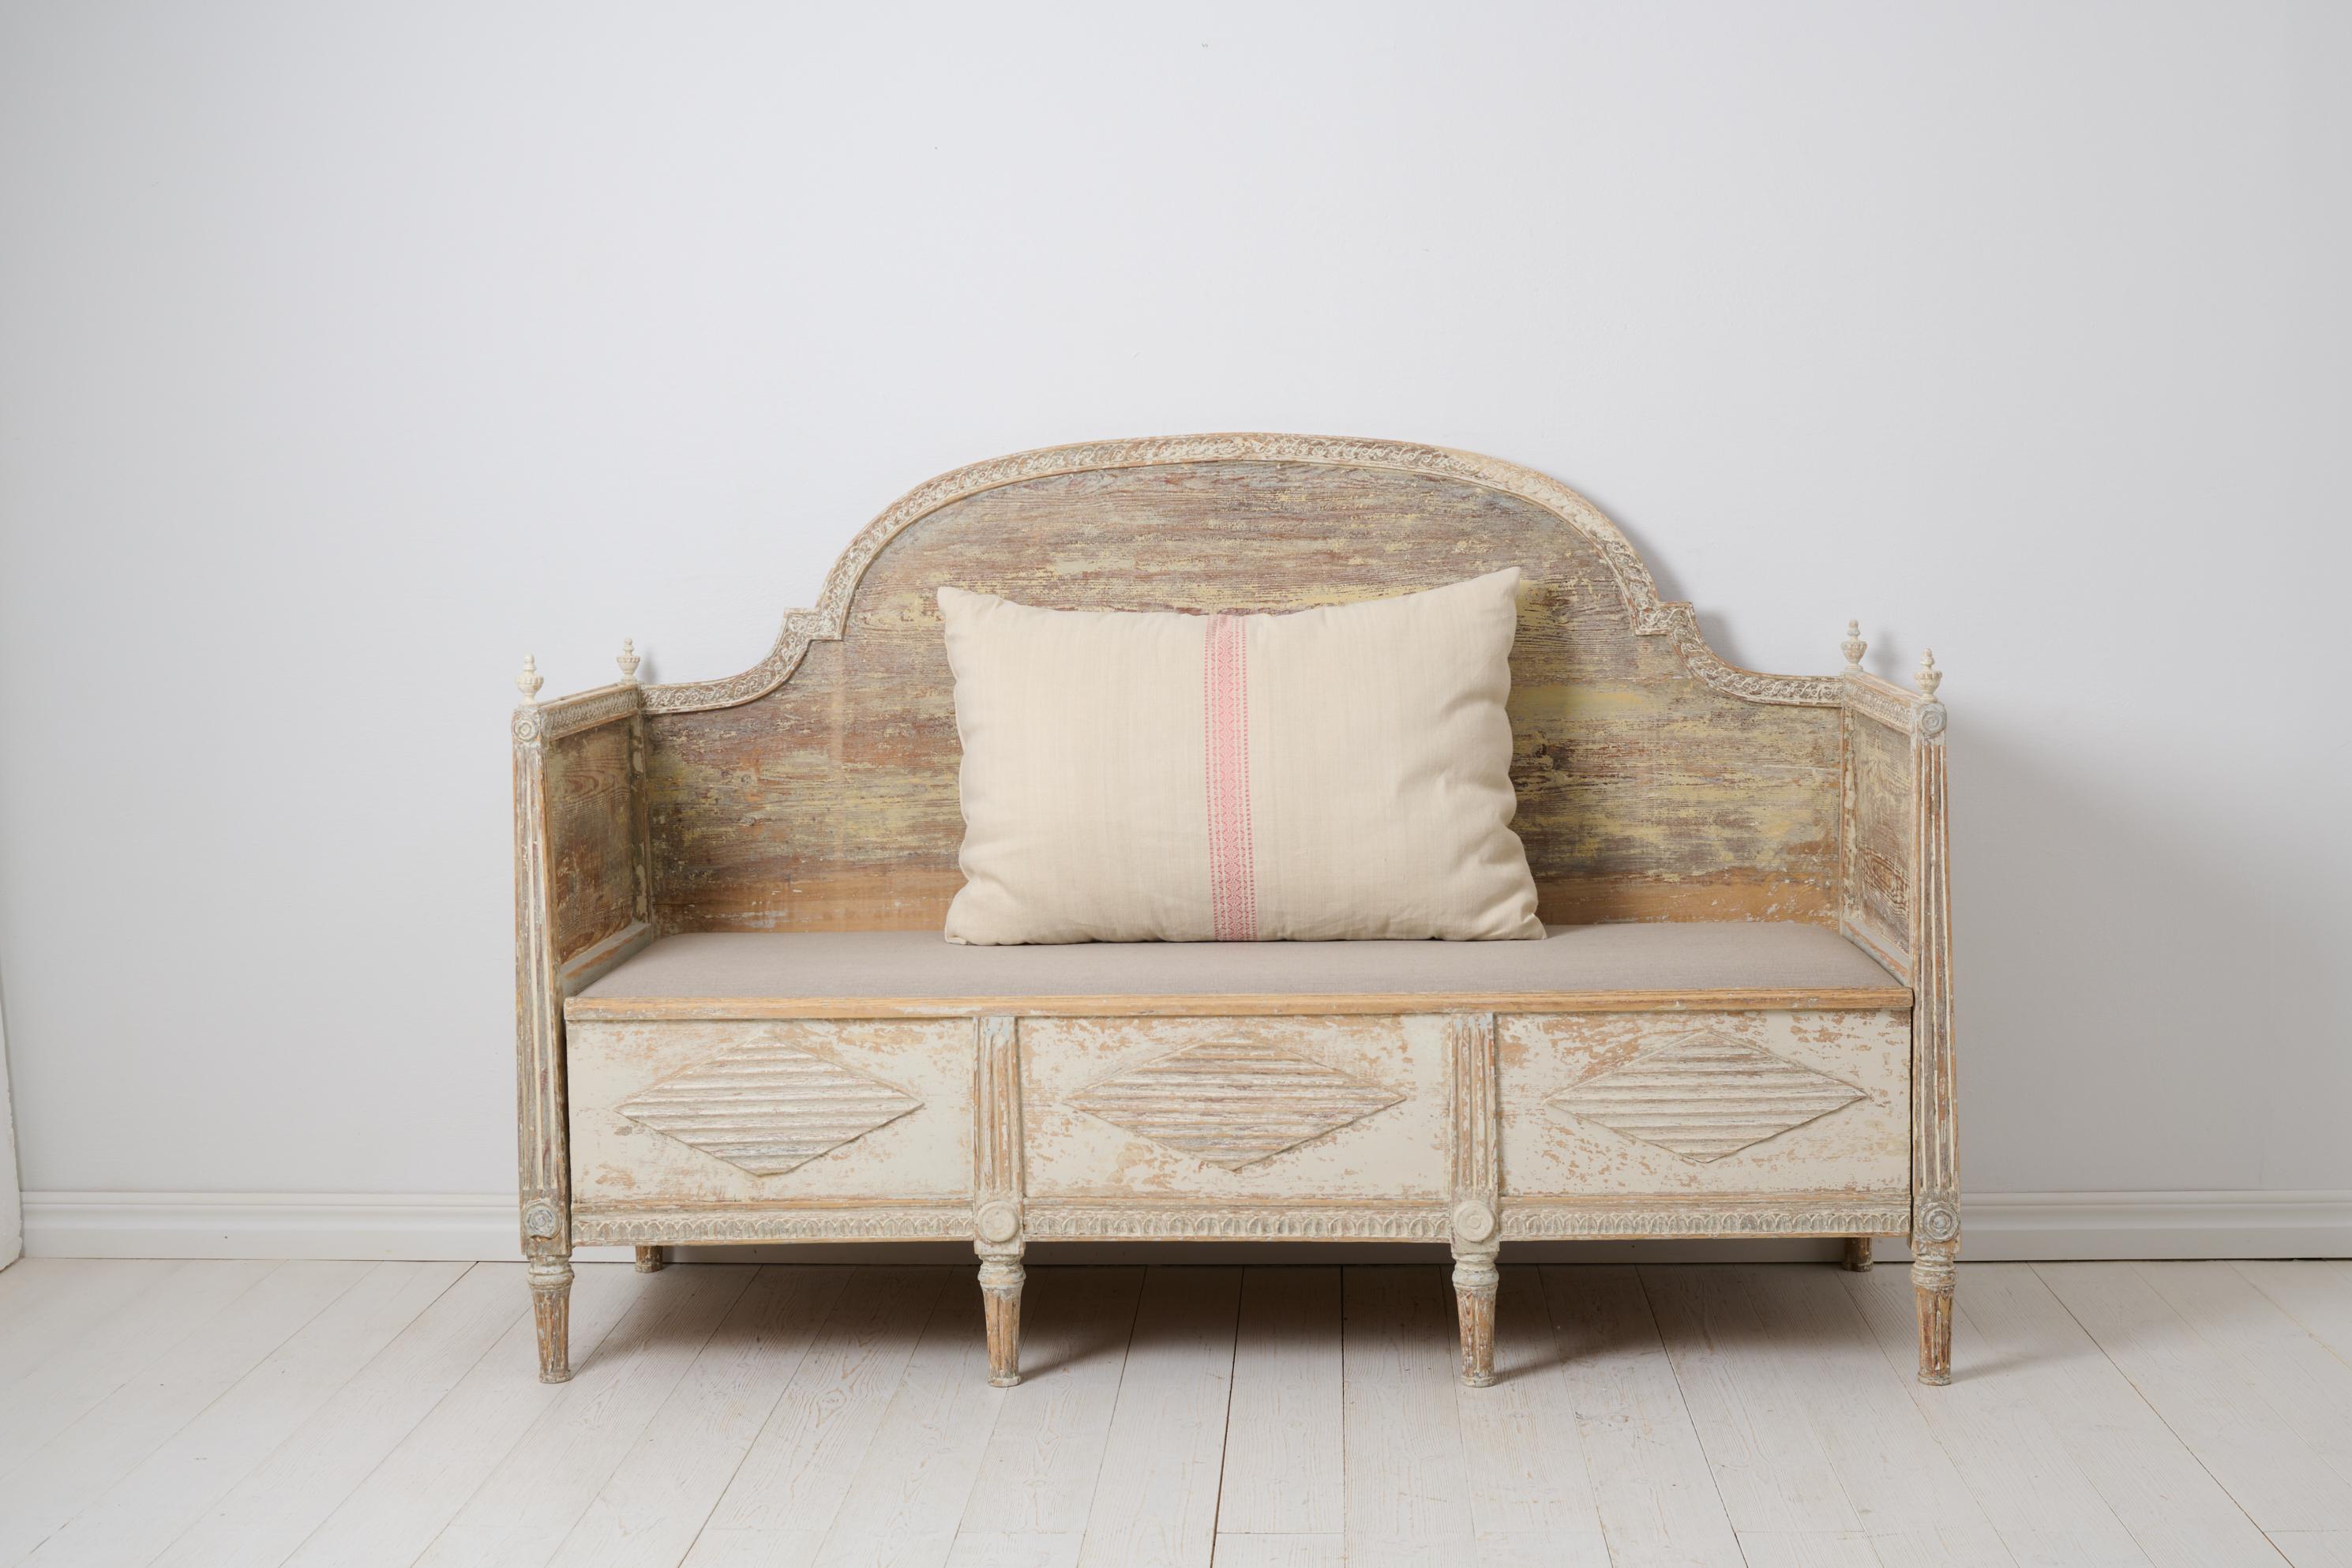 Antique Swedish sofa in gustavian style. The sofa is a genuine country house furniture made by hand around 1820 in northern Sweden. The frame is made in solid pine and the surface has been dry scraped by hand down to the first layer of paint,